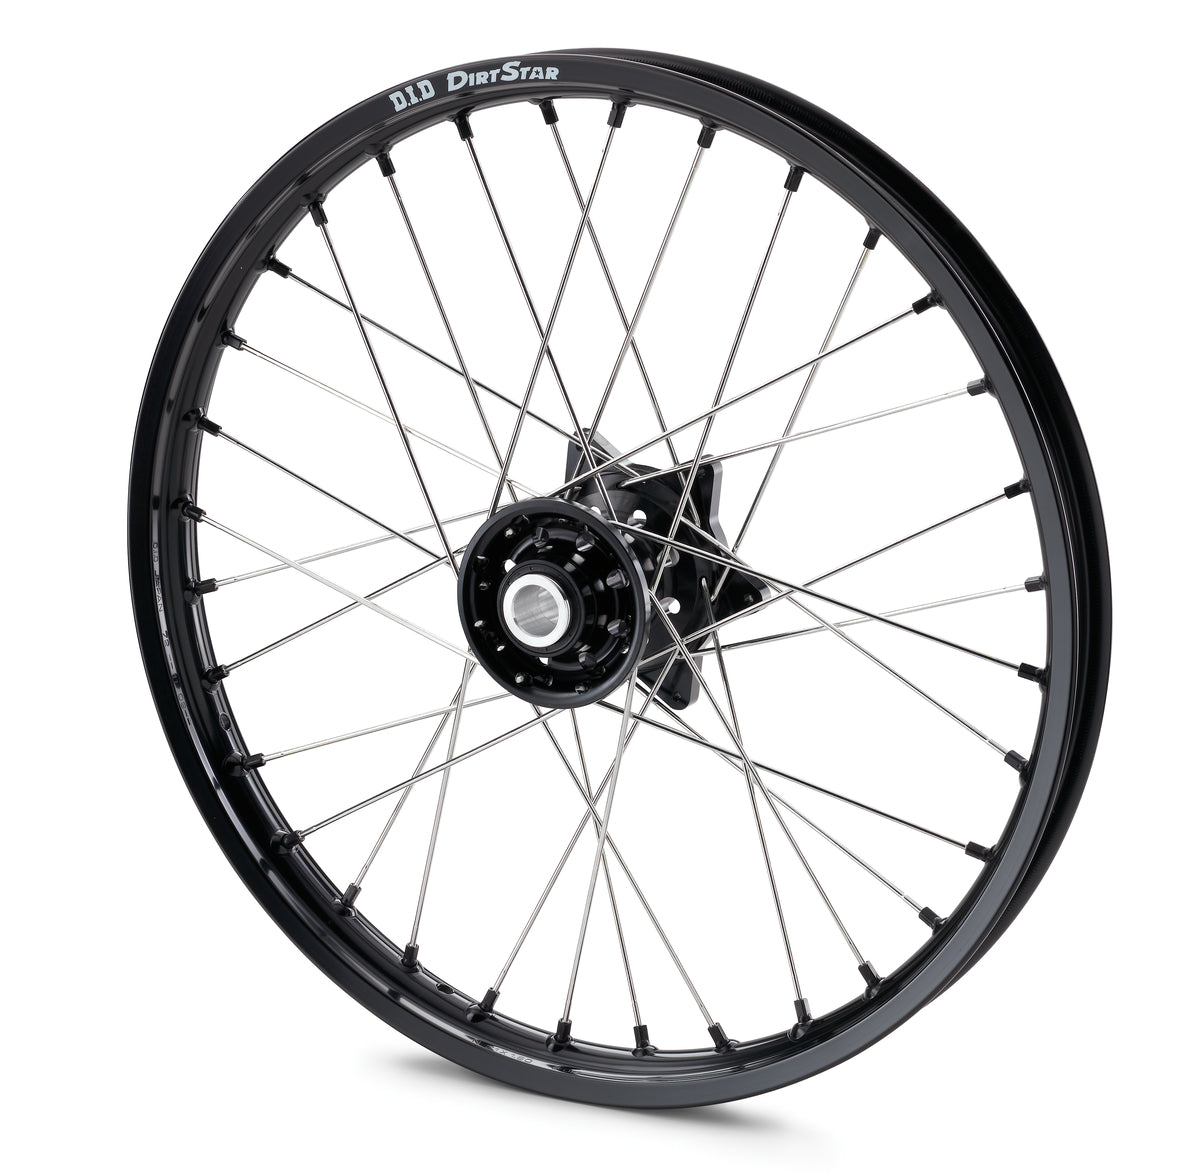 Factory front wheel 1.6x21"